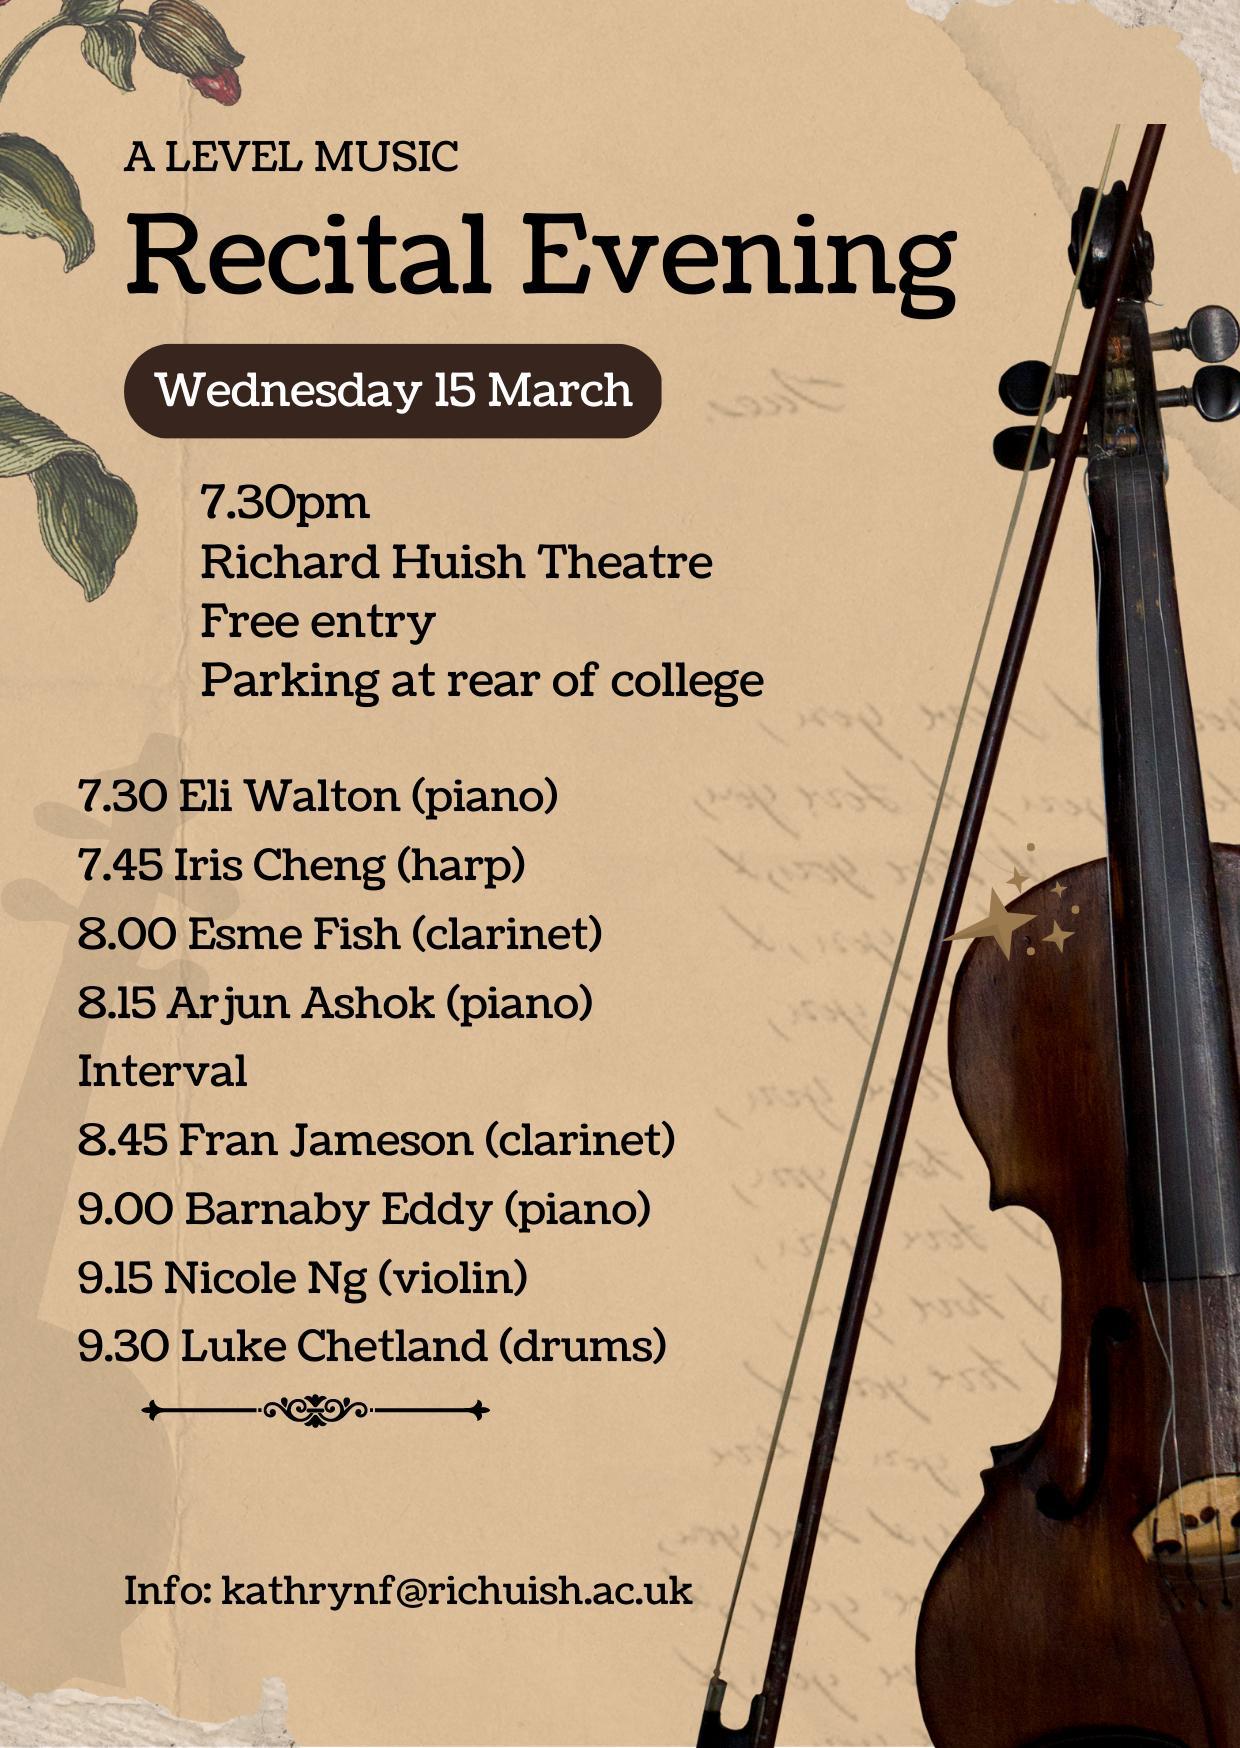 A Level Music Recitals promotion poster